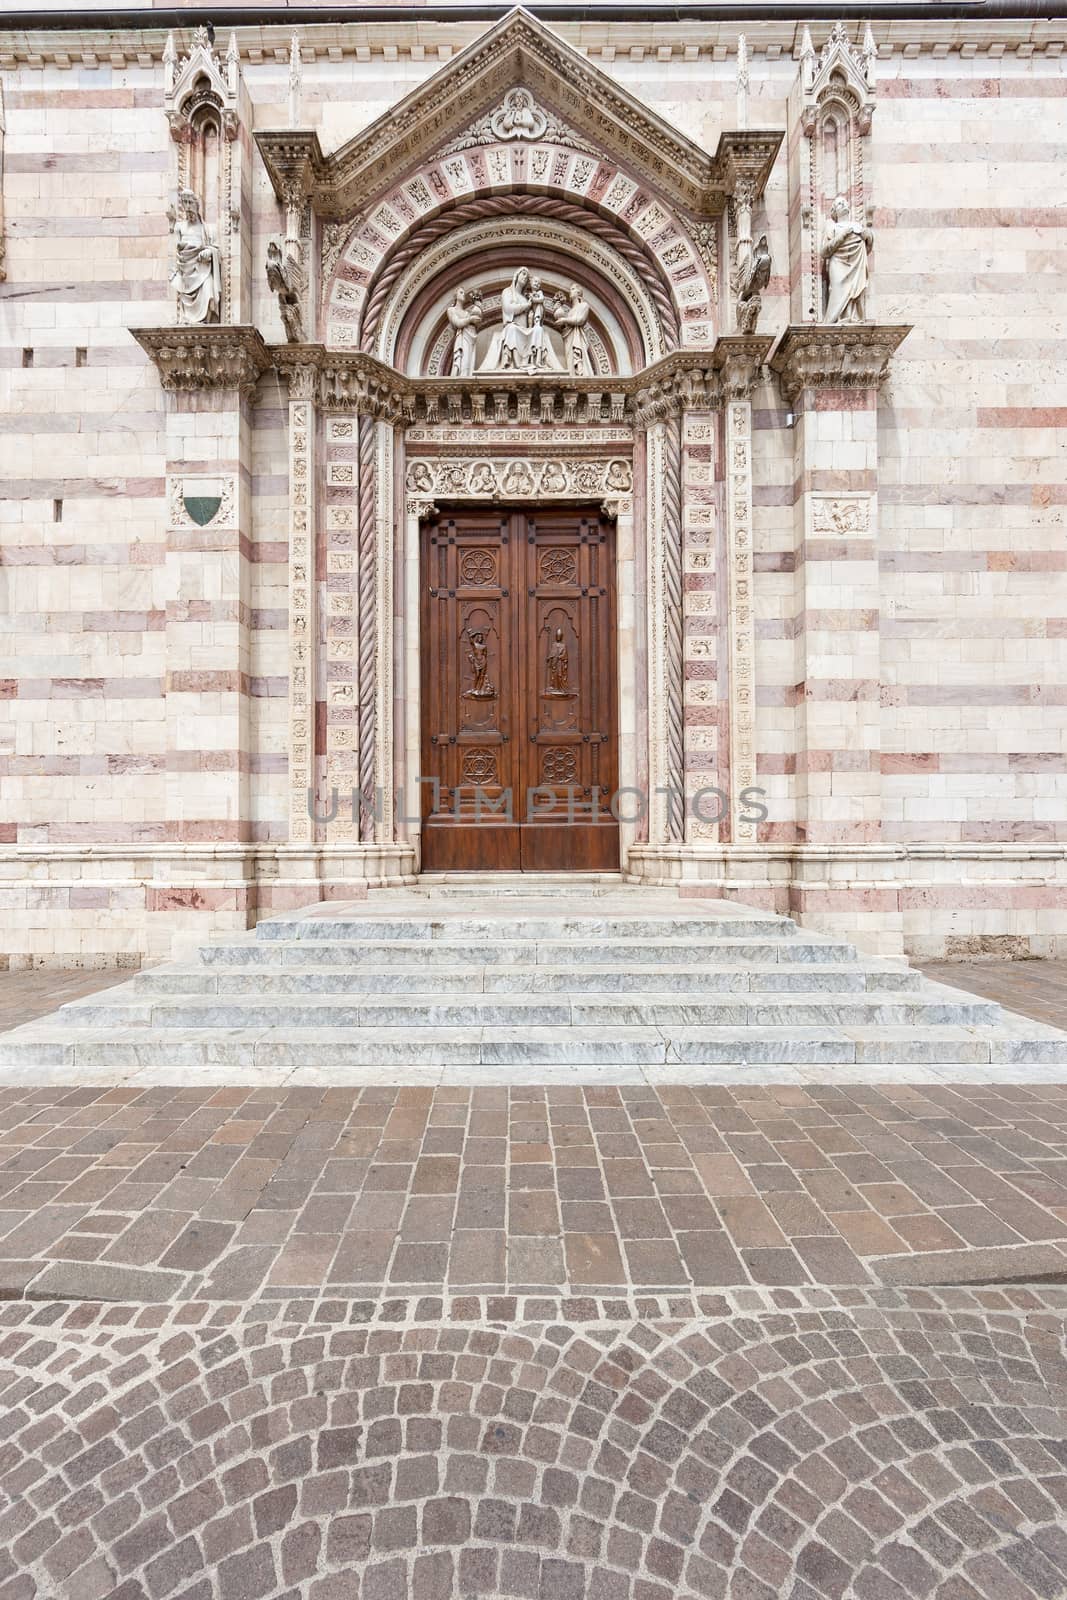 The antique doors to the church. Italy